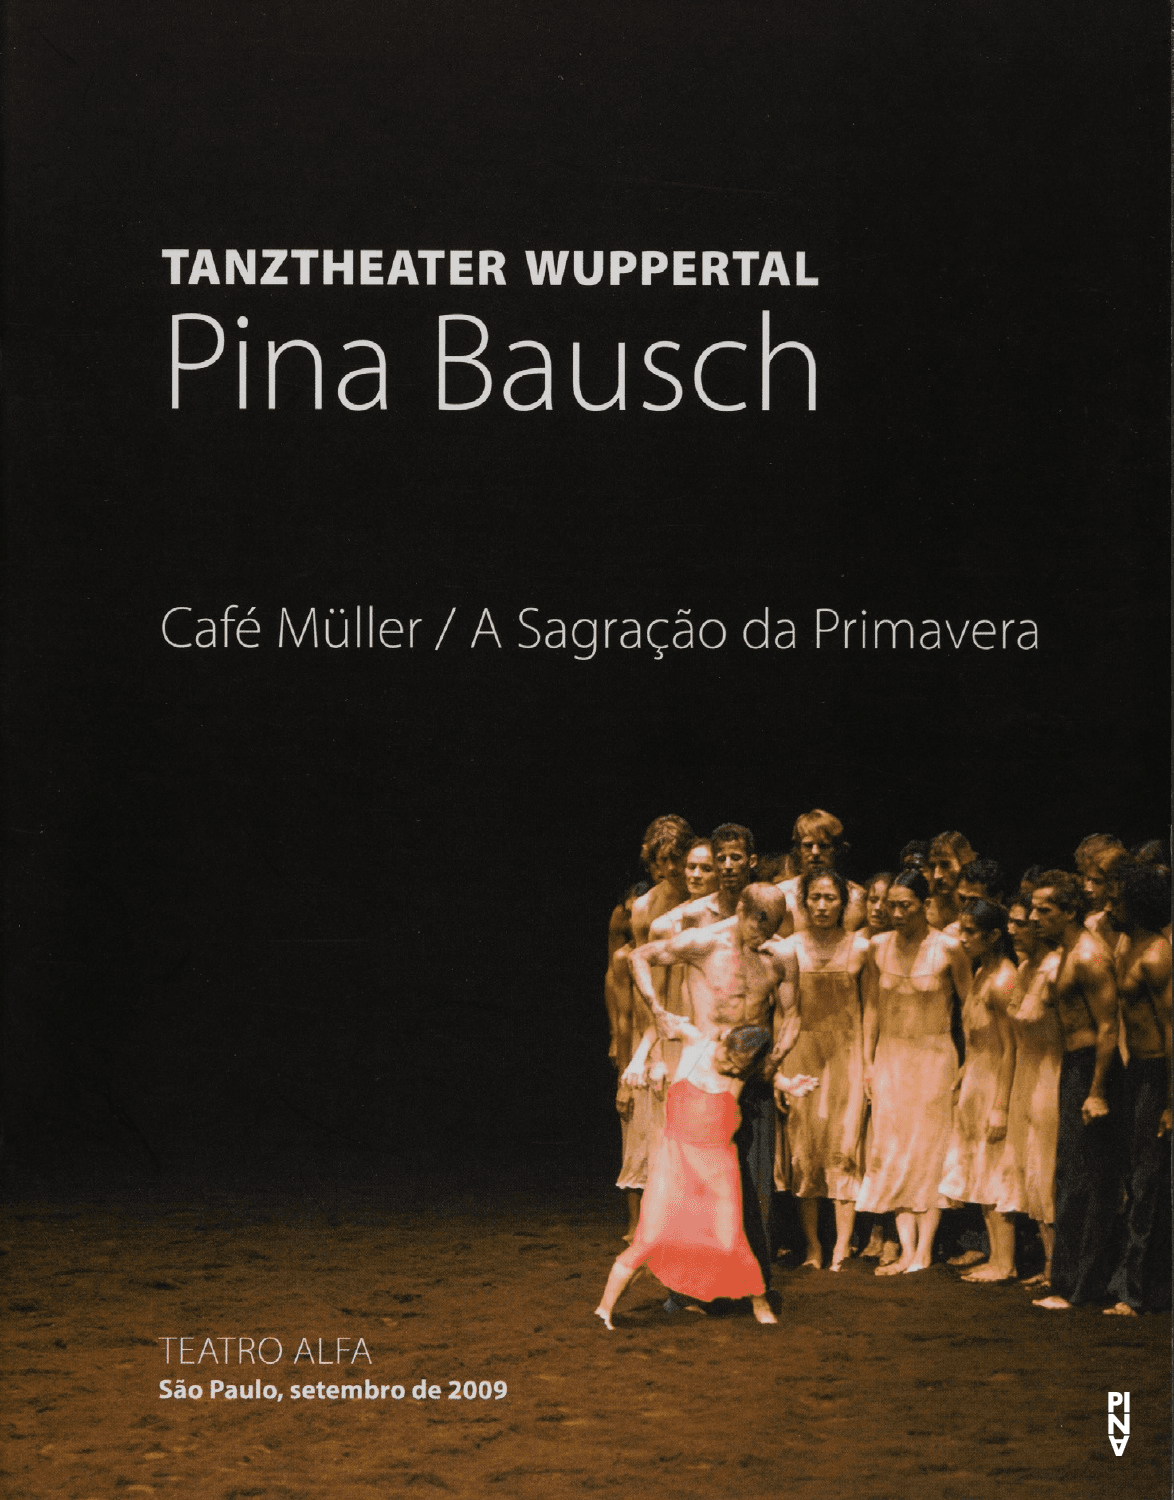 Booklet for “The Rite of Spring” and “Café Müller” by Pina Bausch with Tanztheater Wuppertal in in São Paulo, 09/21/2009 – 10/01/2009